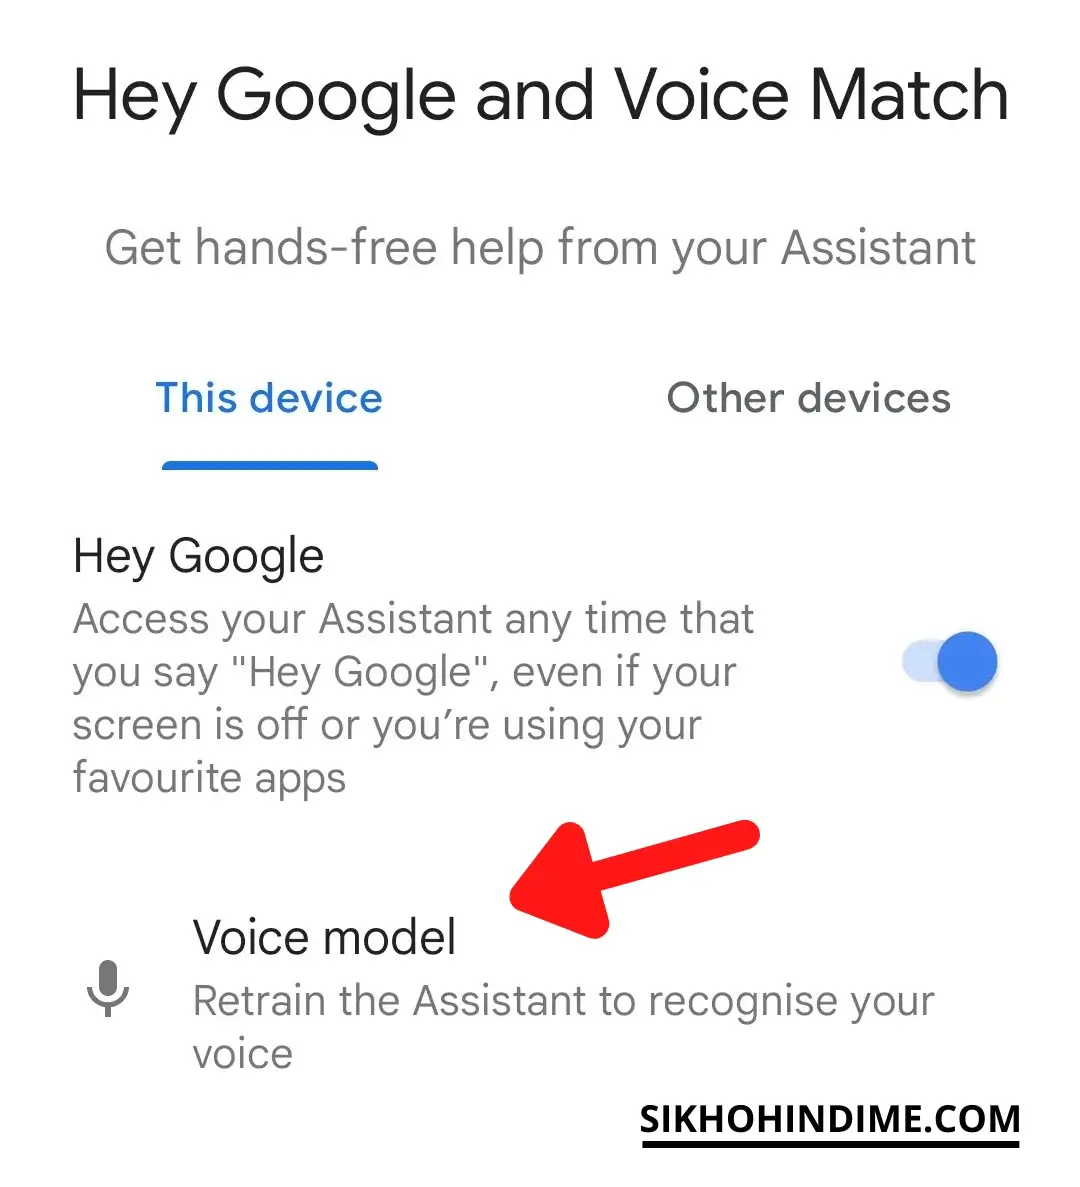 Click on voice model